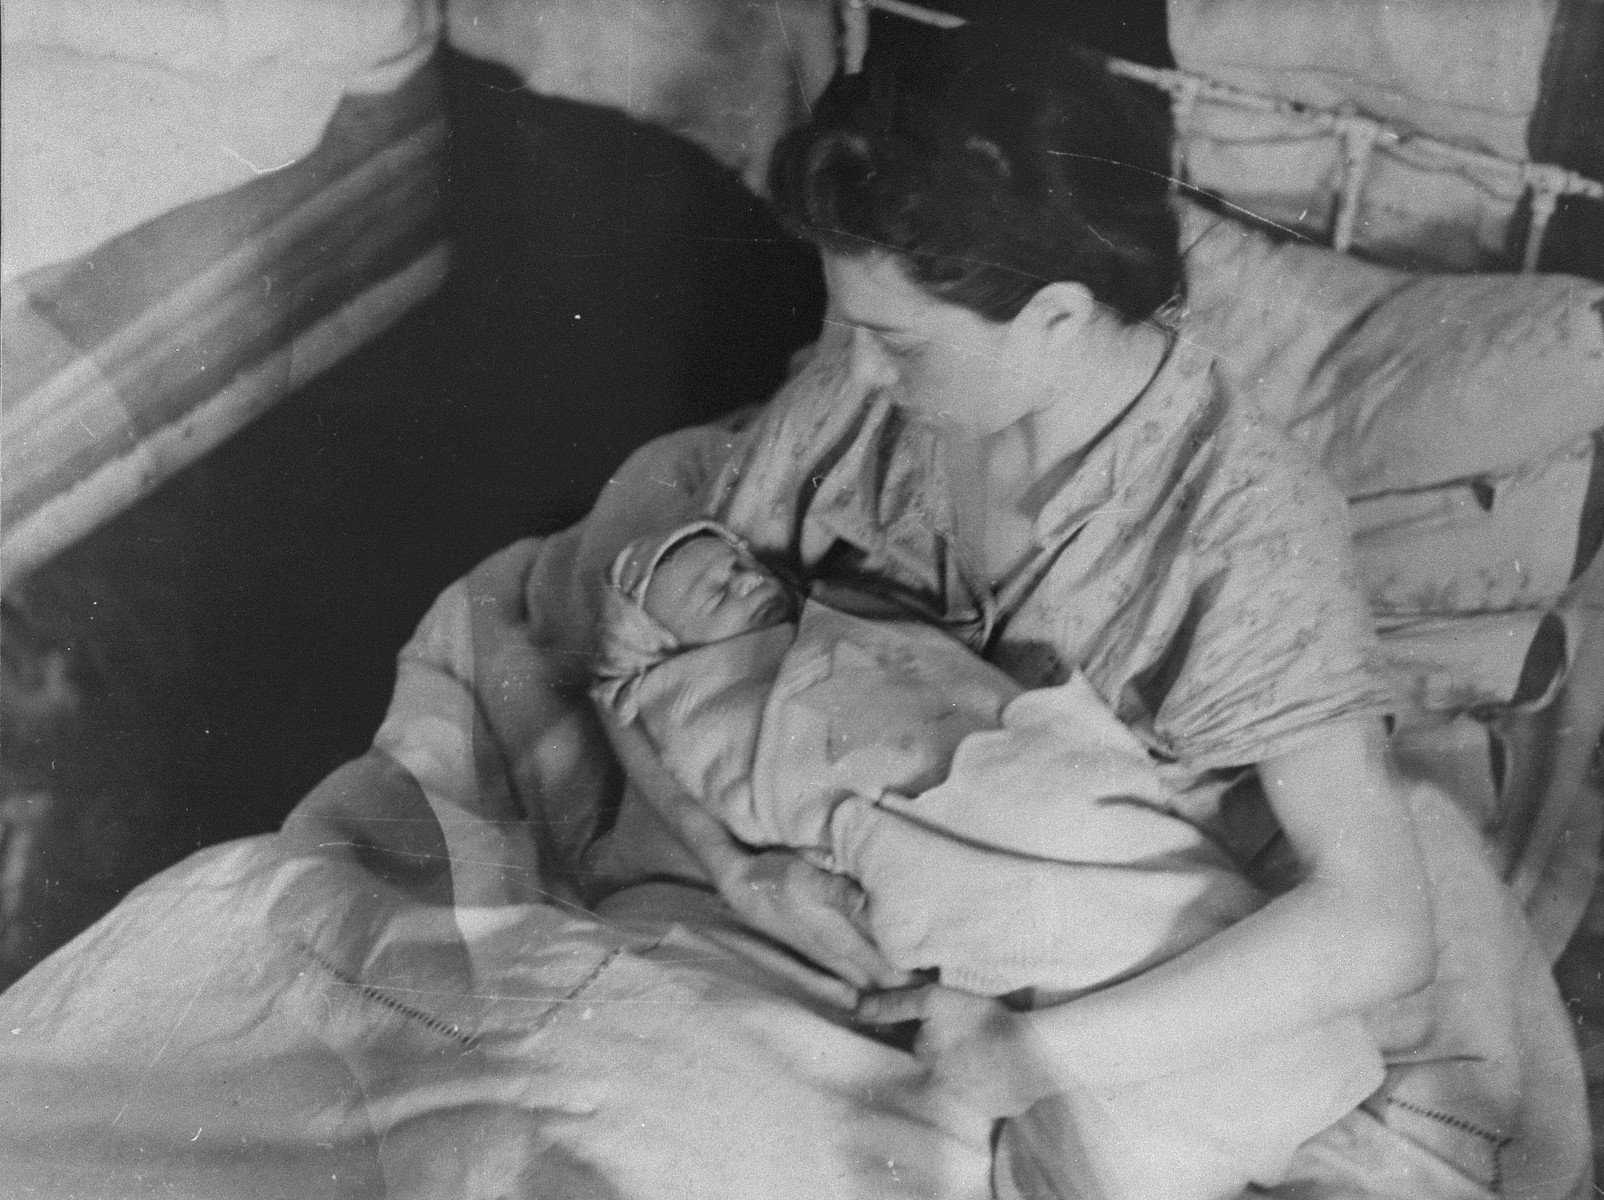 A mother cradles her new born baby in the Kovno ghetto hospital.

The child is swaddled in a blanket with a Star of David.